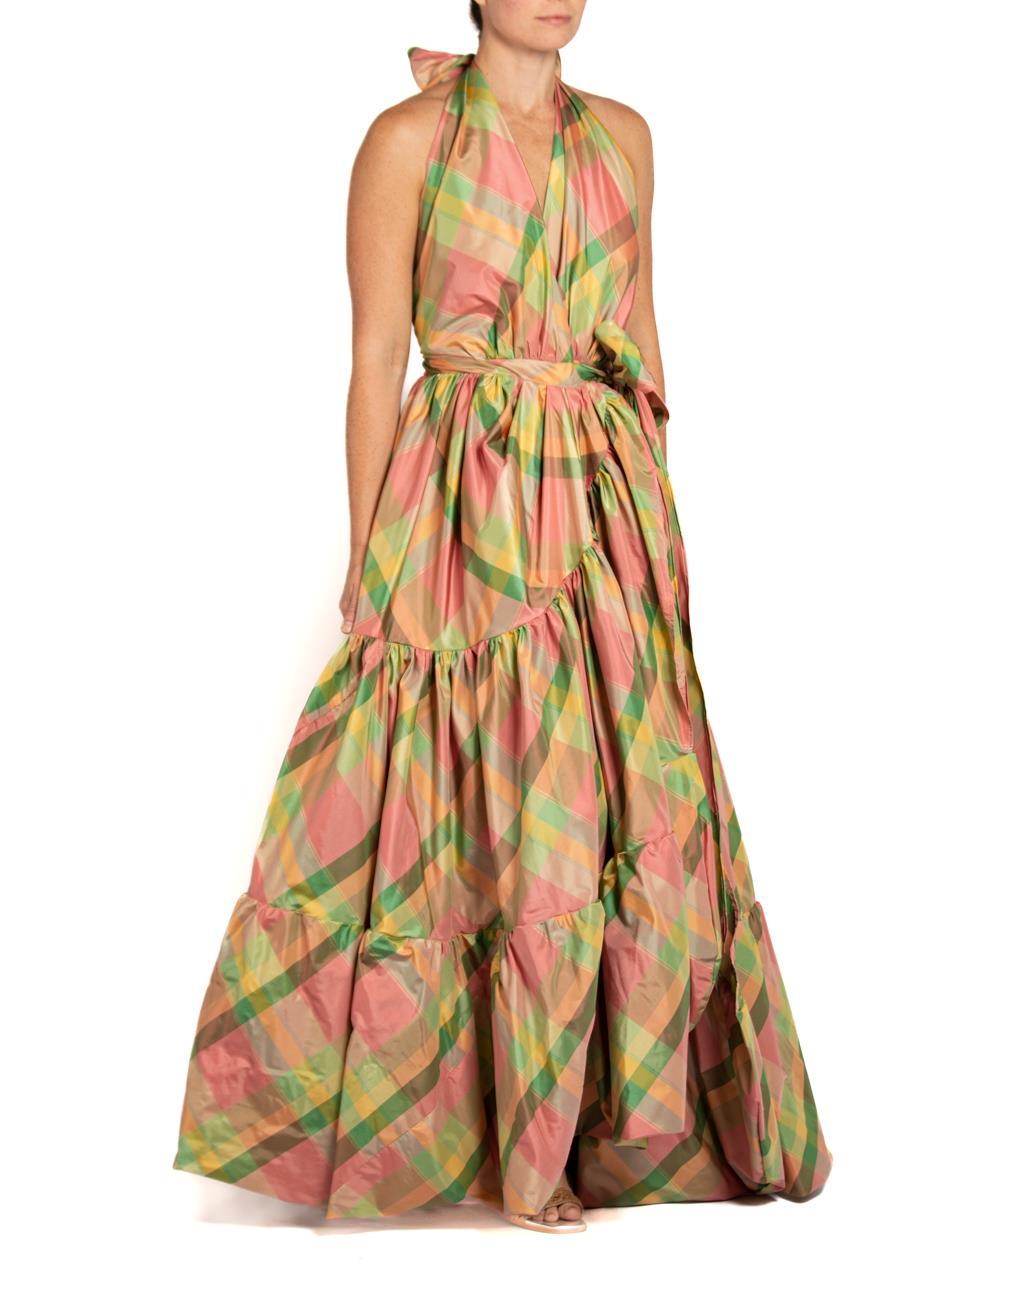 MORPHEW COLLECTION Pink & Green Silk Taffeta Plaid Gown For Sale 3